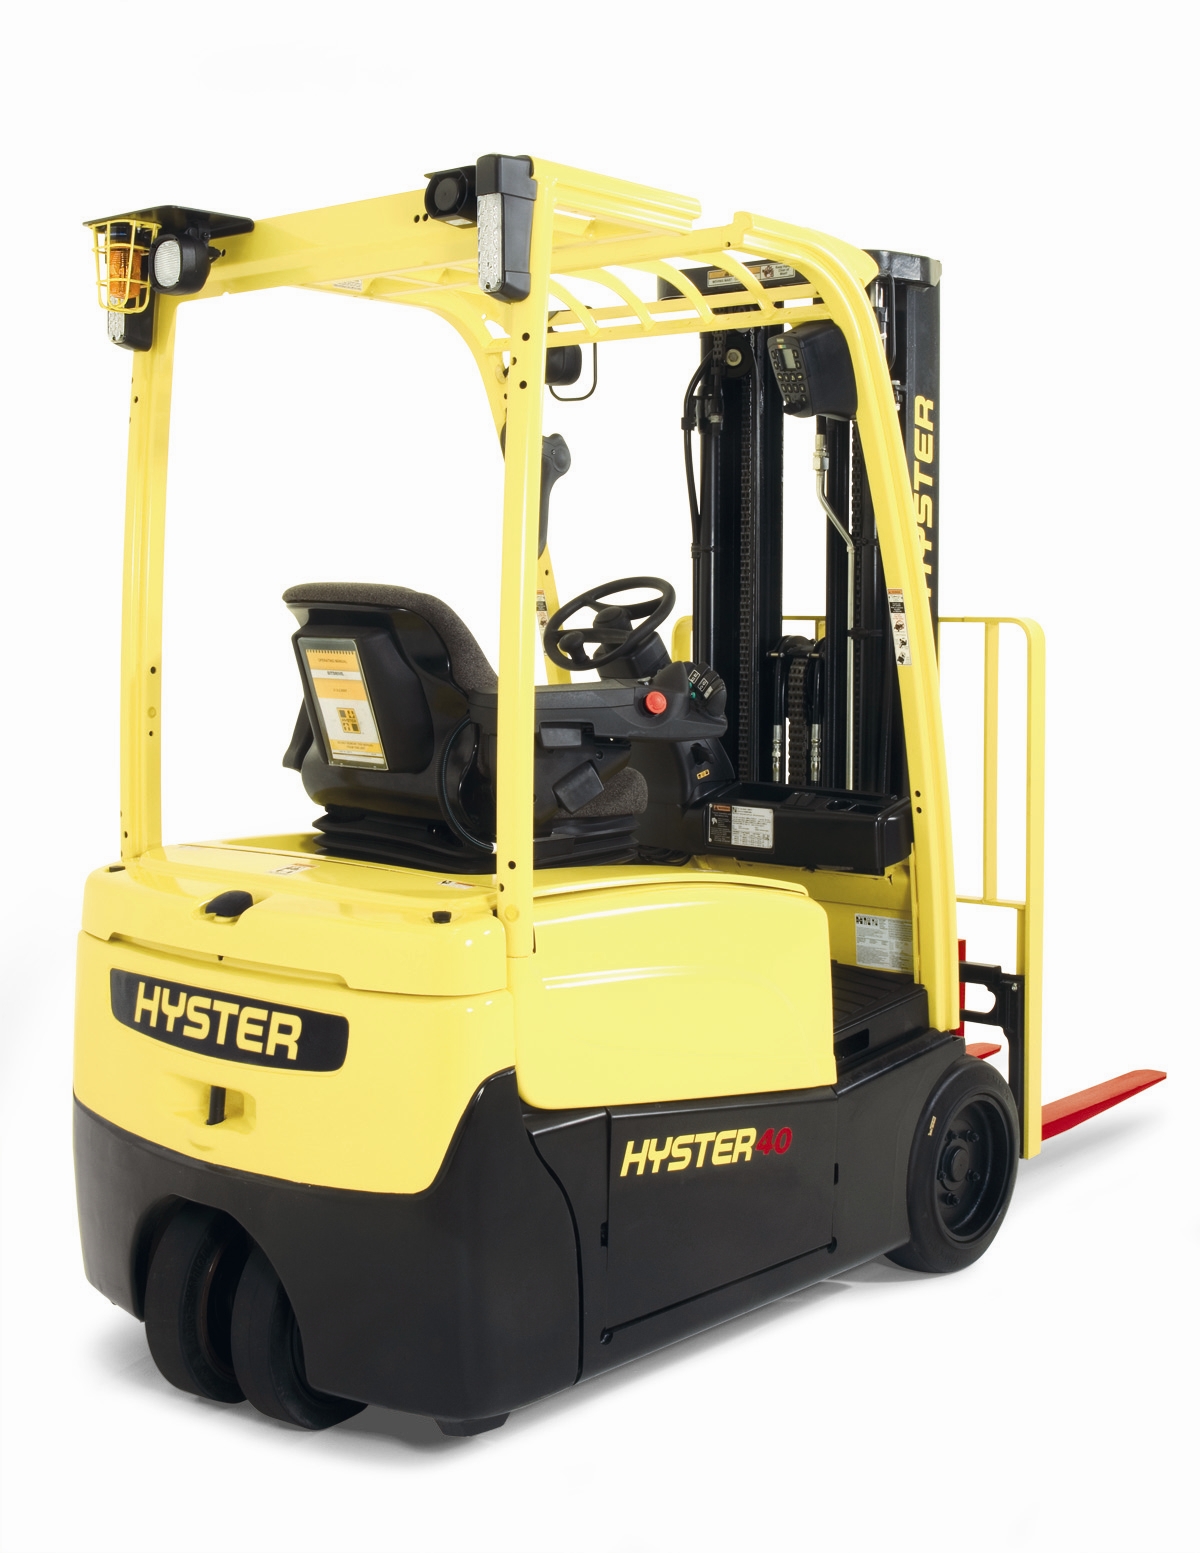 Hyster Launches New Sit-Down Electric Lift Truck Series